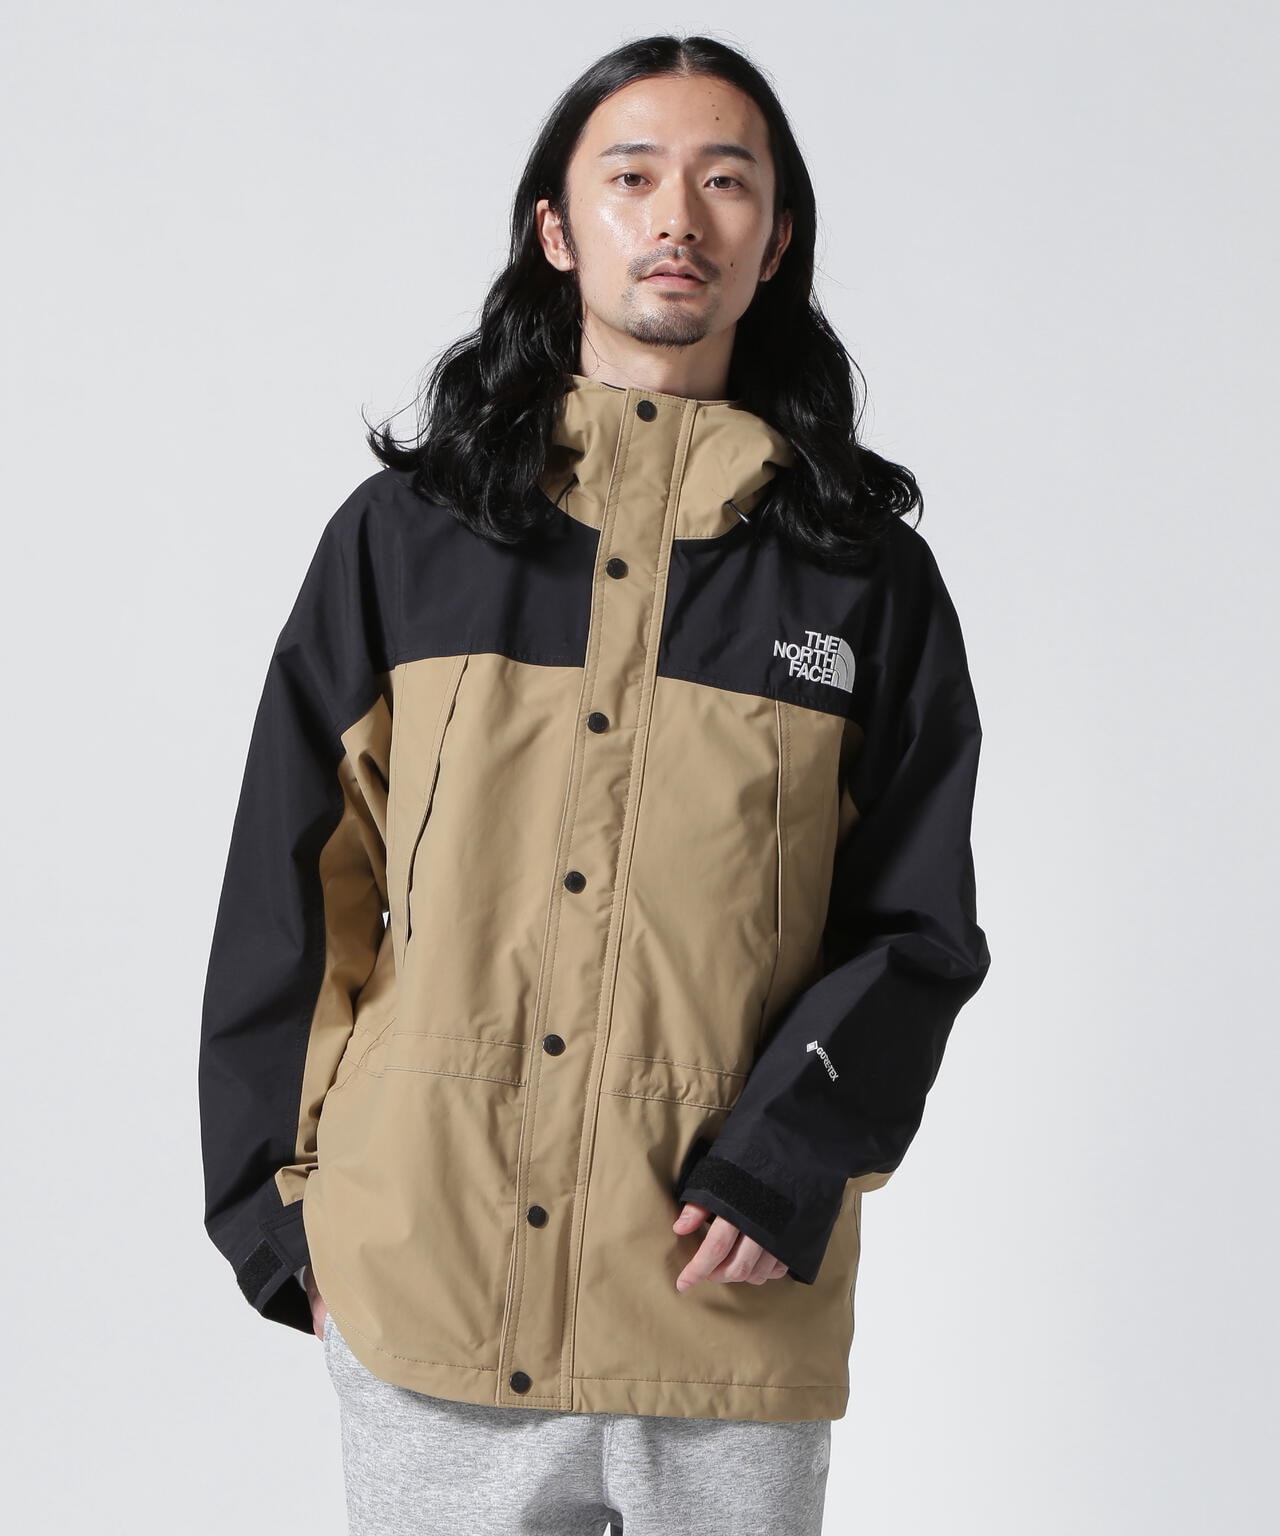 THE NORTH FACE mountain light jacketノースフェイス